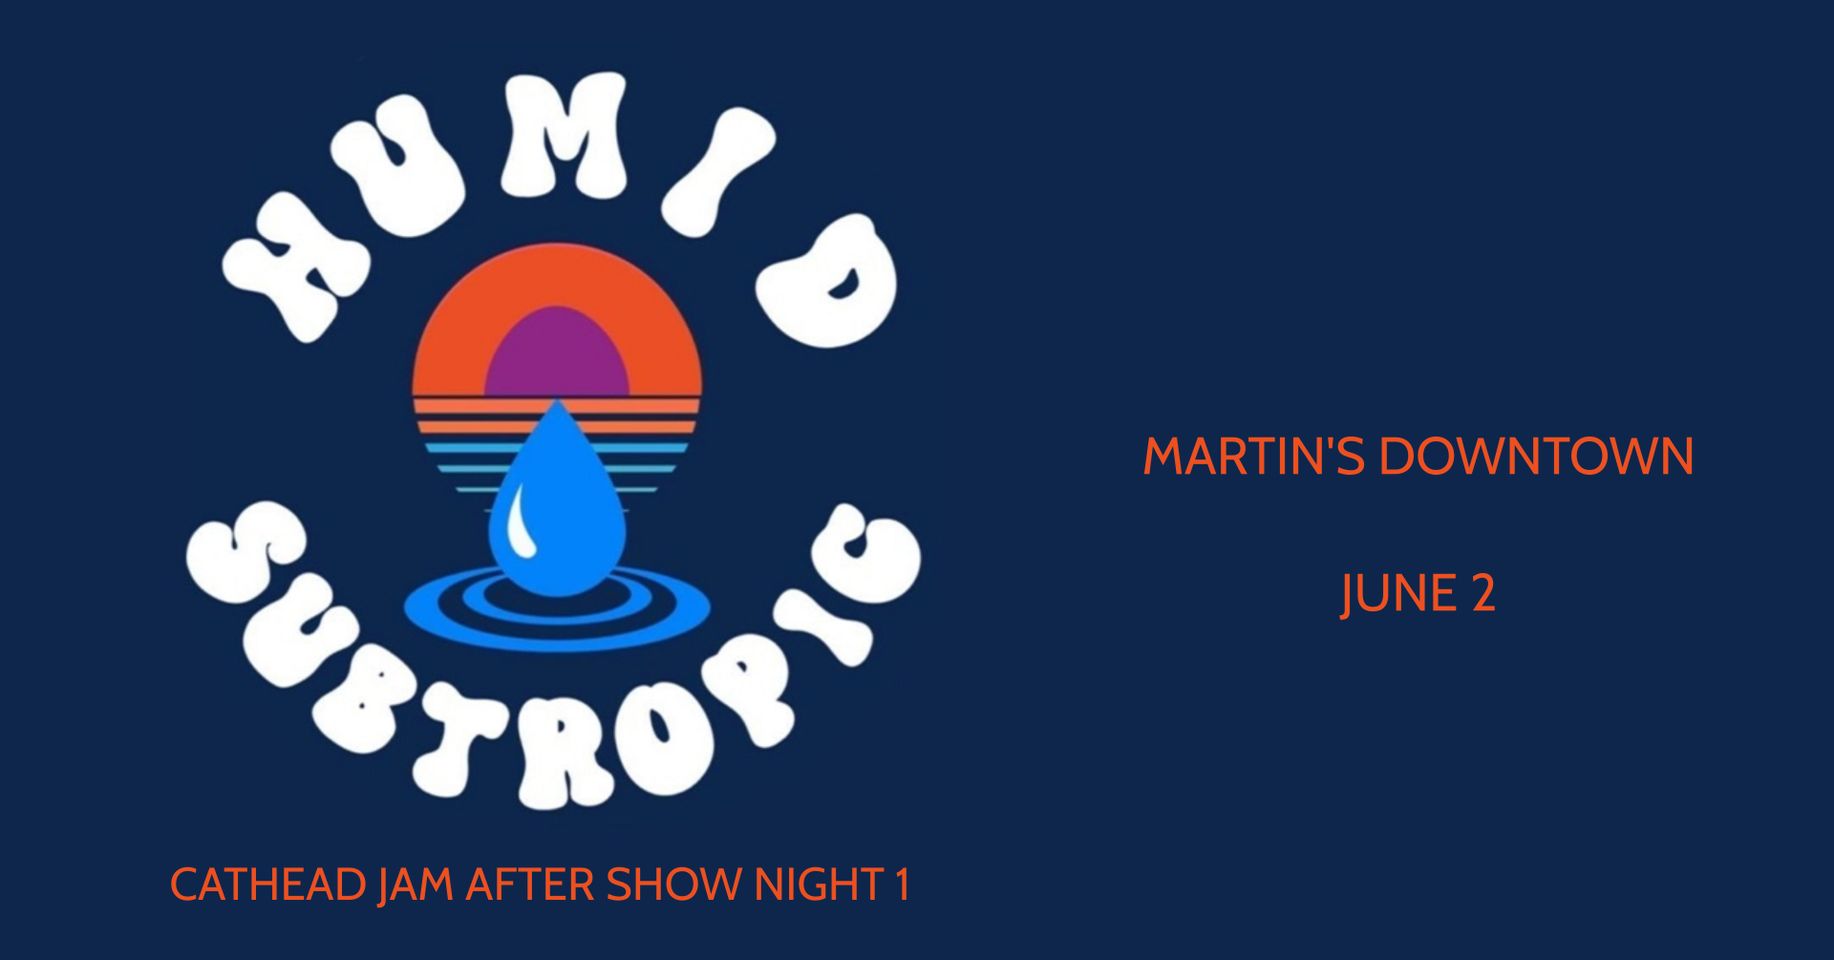 Humid Subtropic (Cathead Jam Aftershow) at Martin’s Downtown